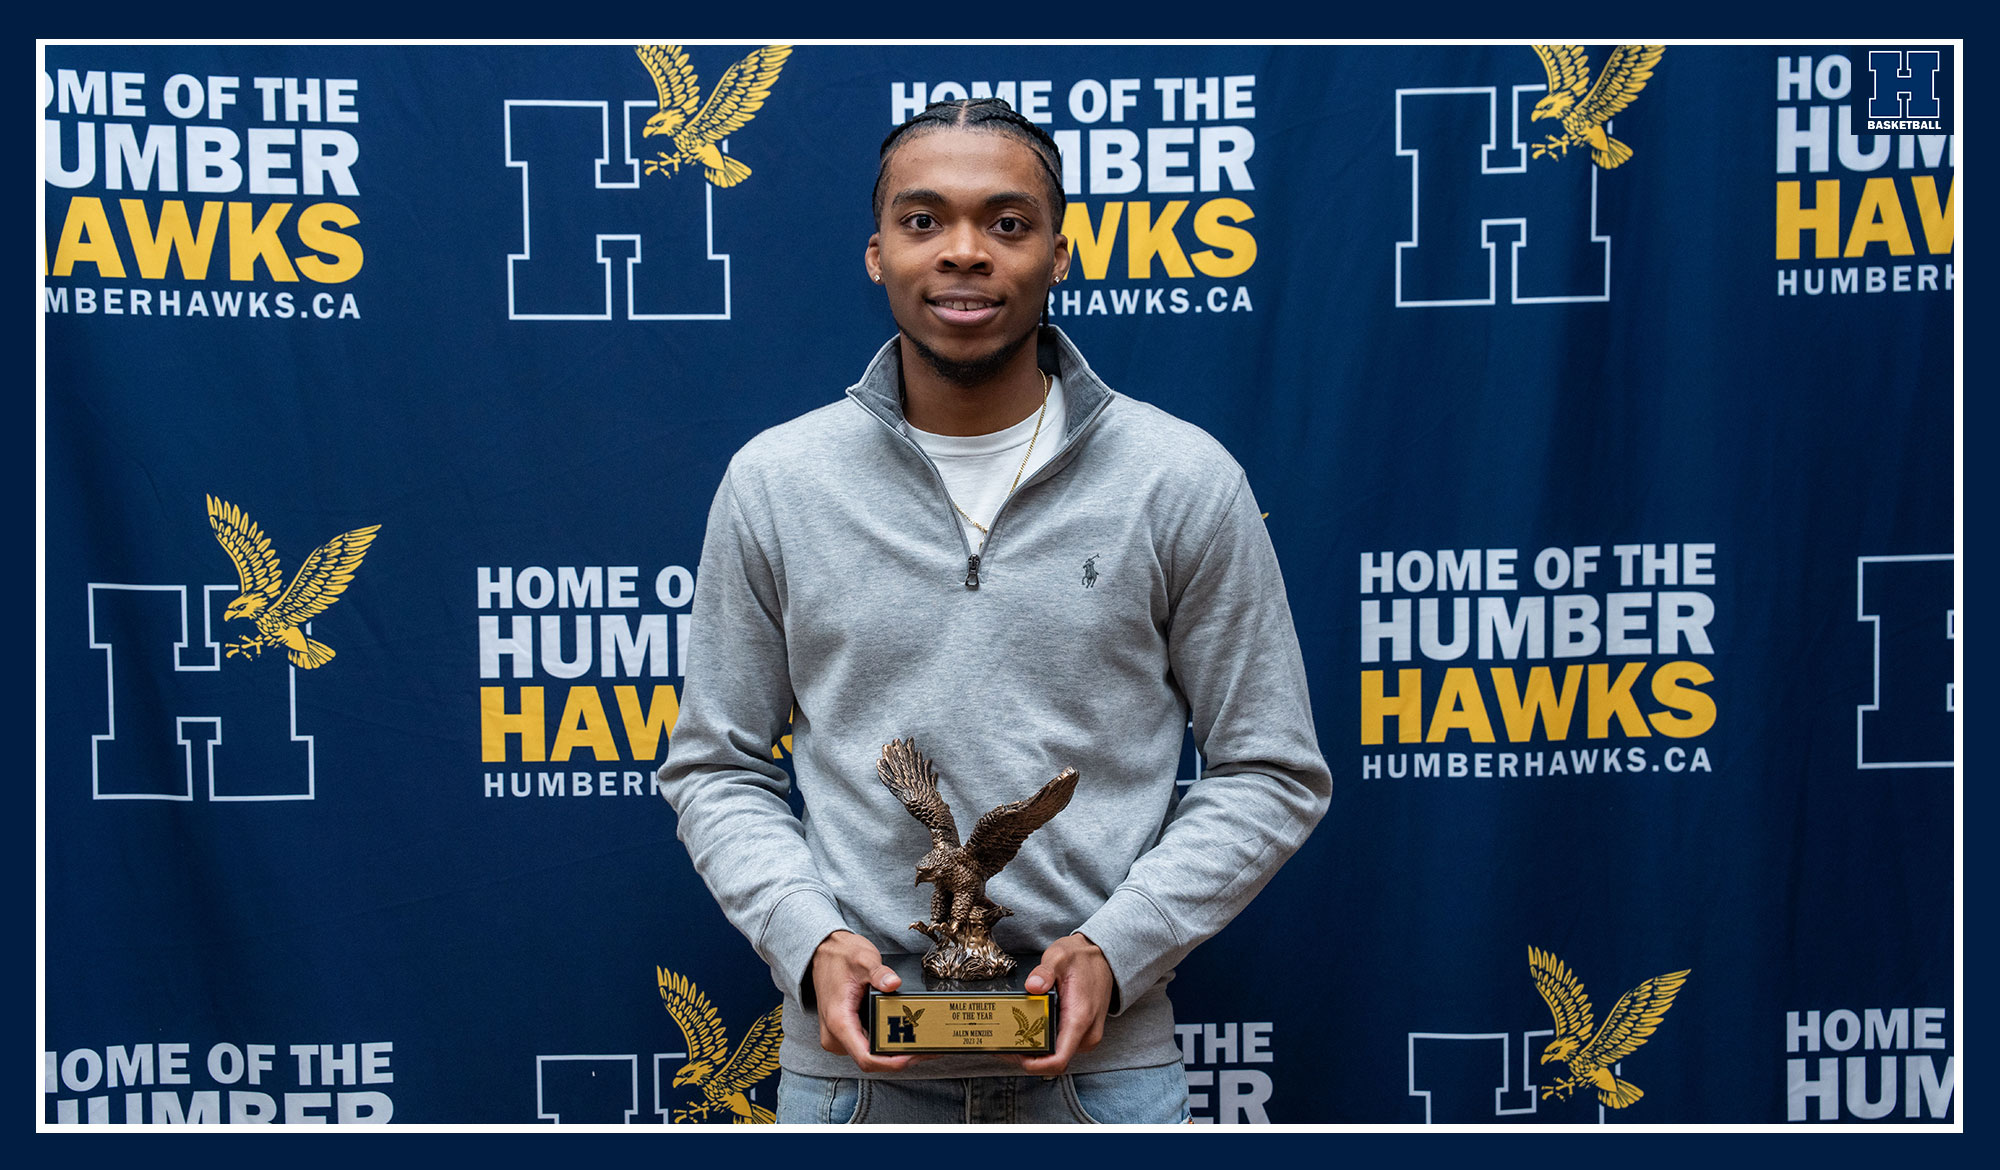 Jalen Menzies named Humber Male Athlete of the Year